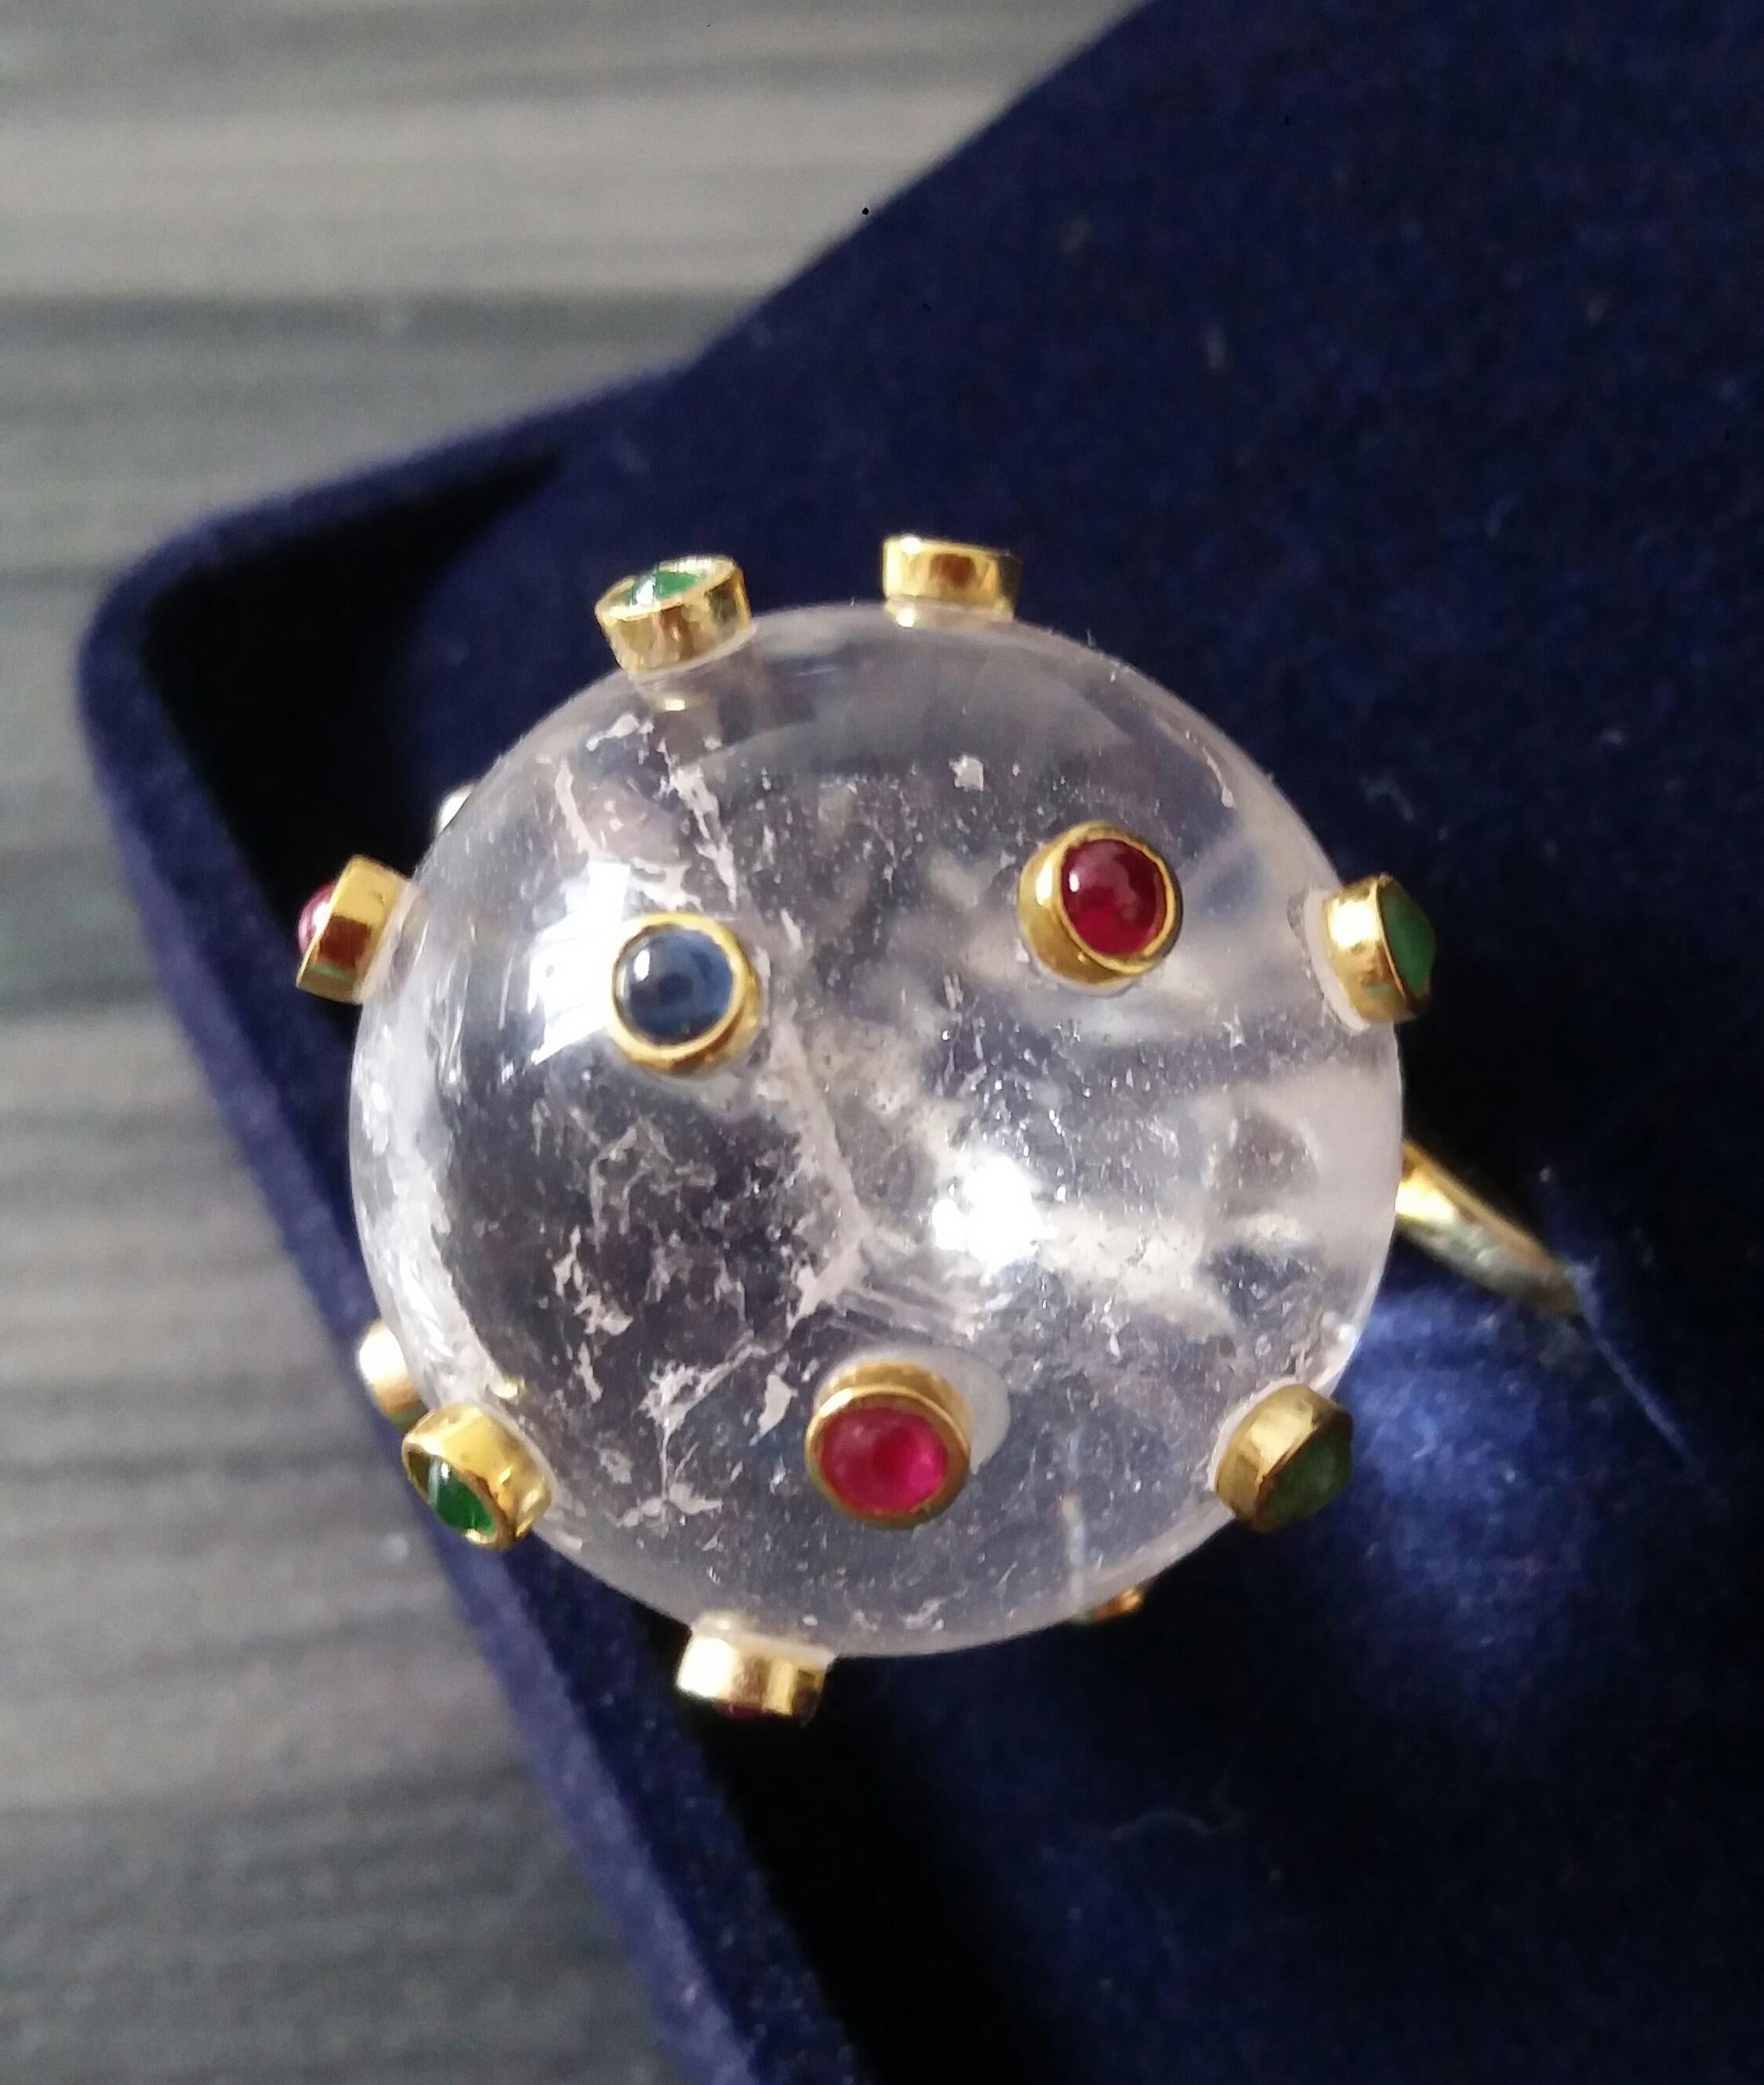 150 Carat Natural Quartz Ball Rubies Emeralds Sapphires Round Cabs 14K Gold Ring For Sale 9